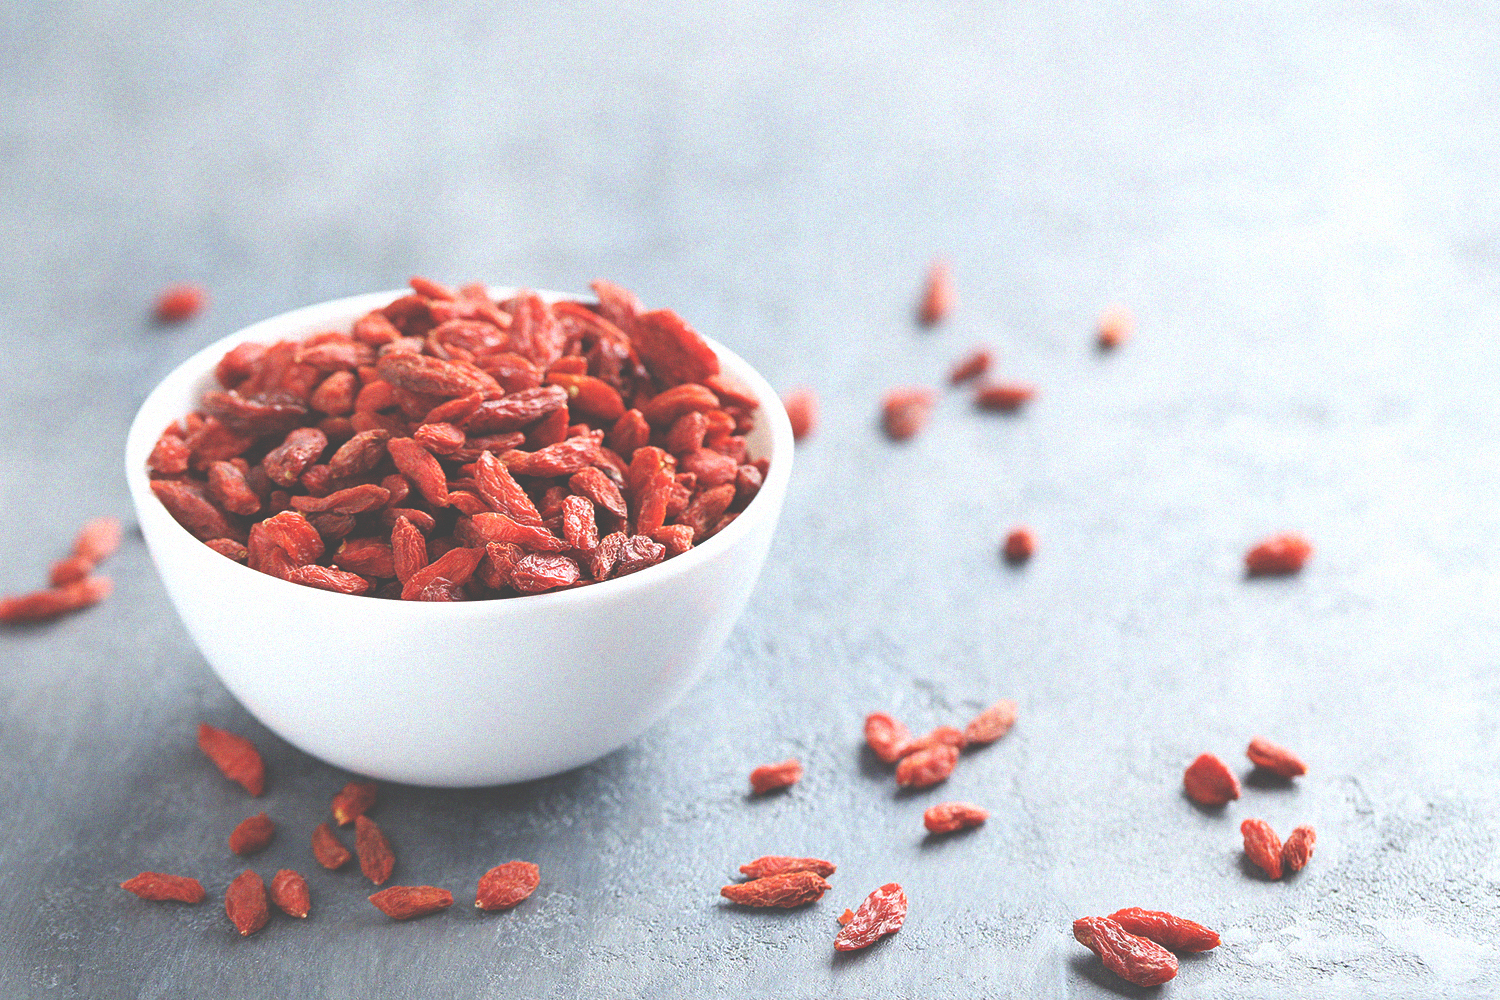 Find out why goji berries pack a nutritional punch.